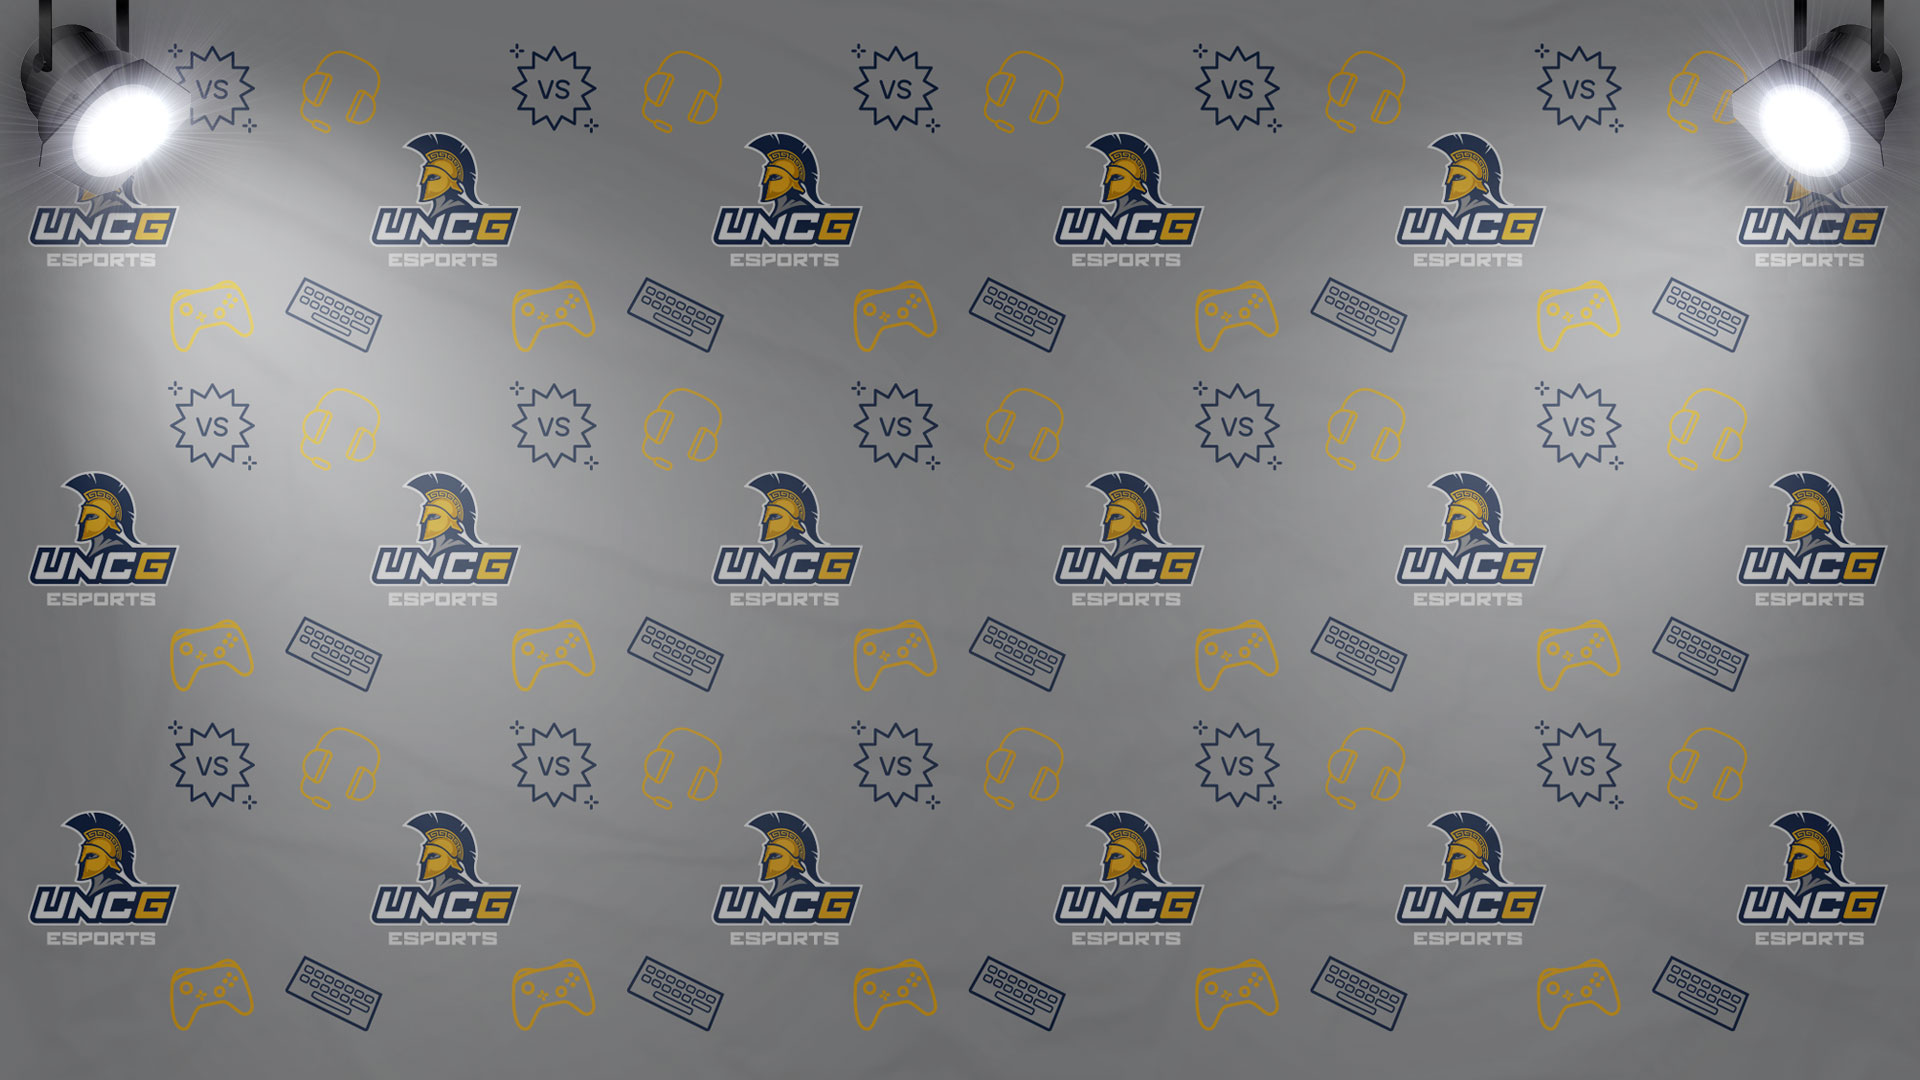 Grey Background of the UNCG Esports logo in a step and repeat pattern